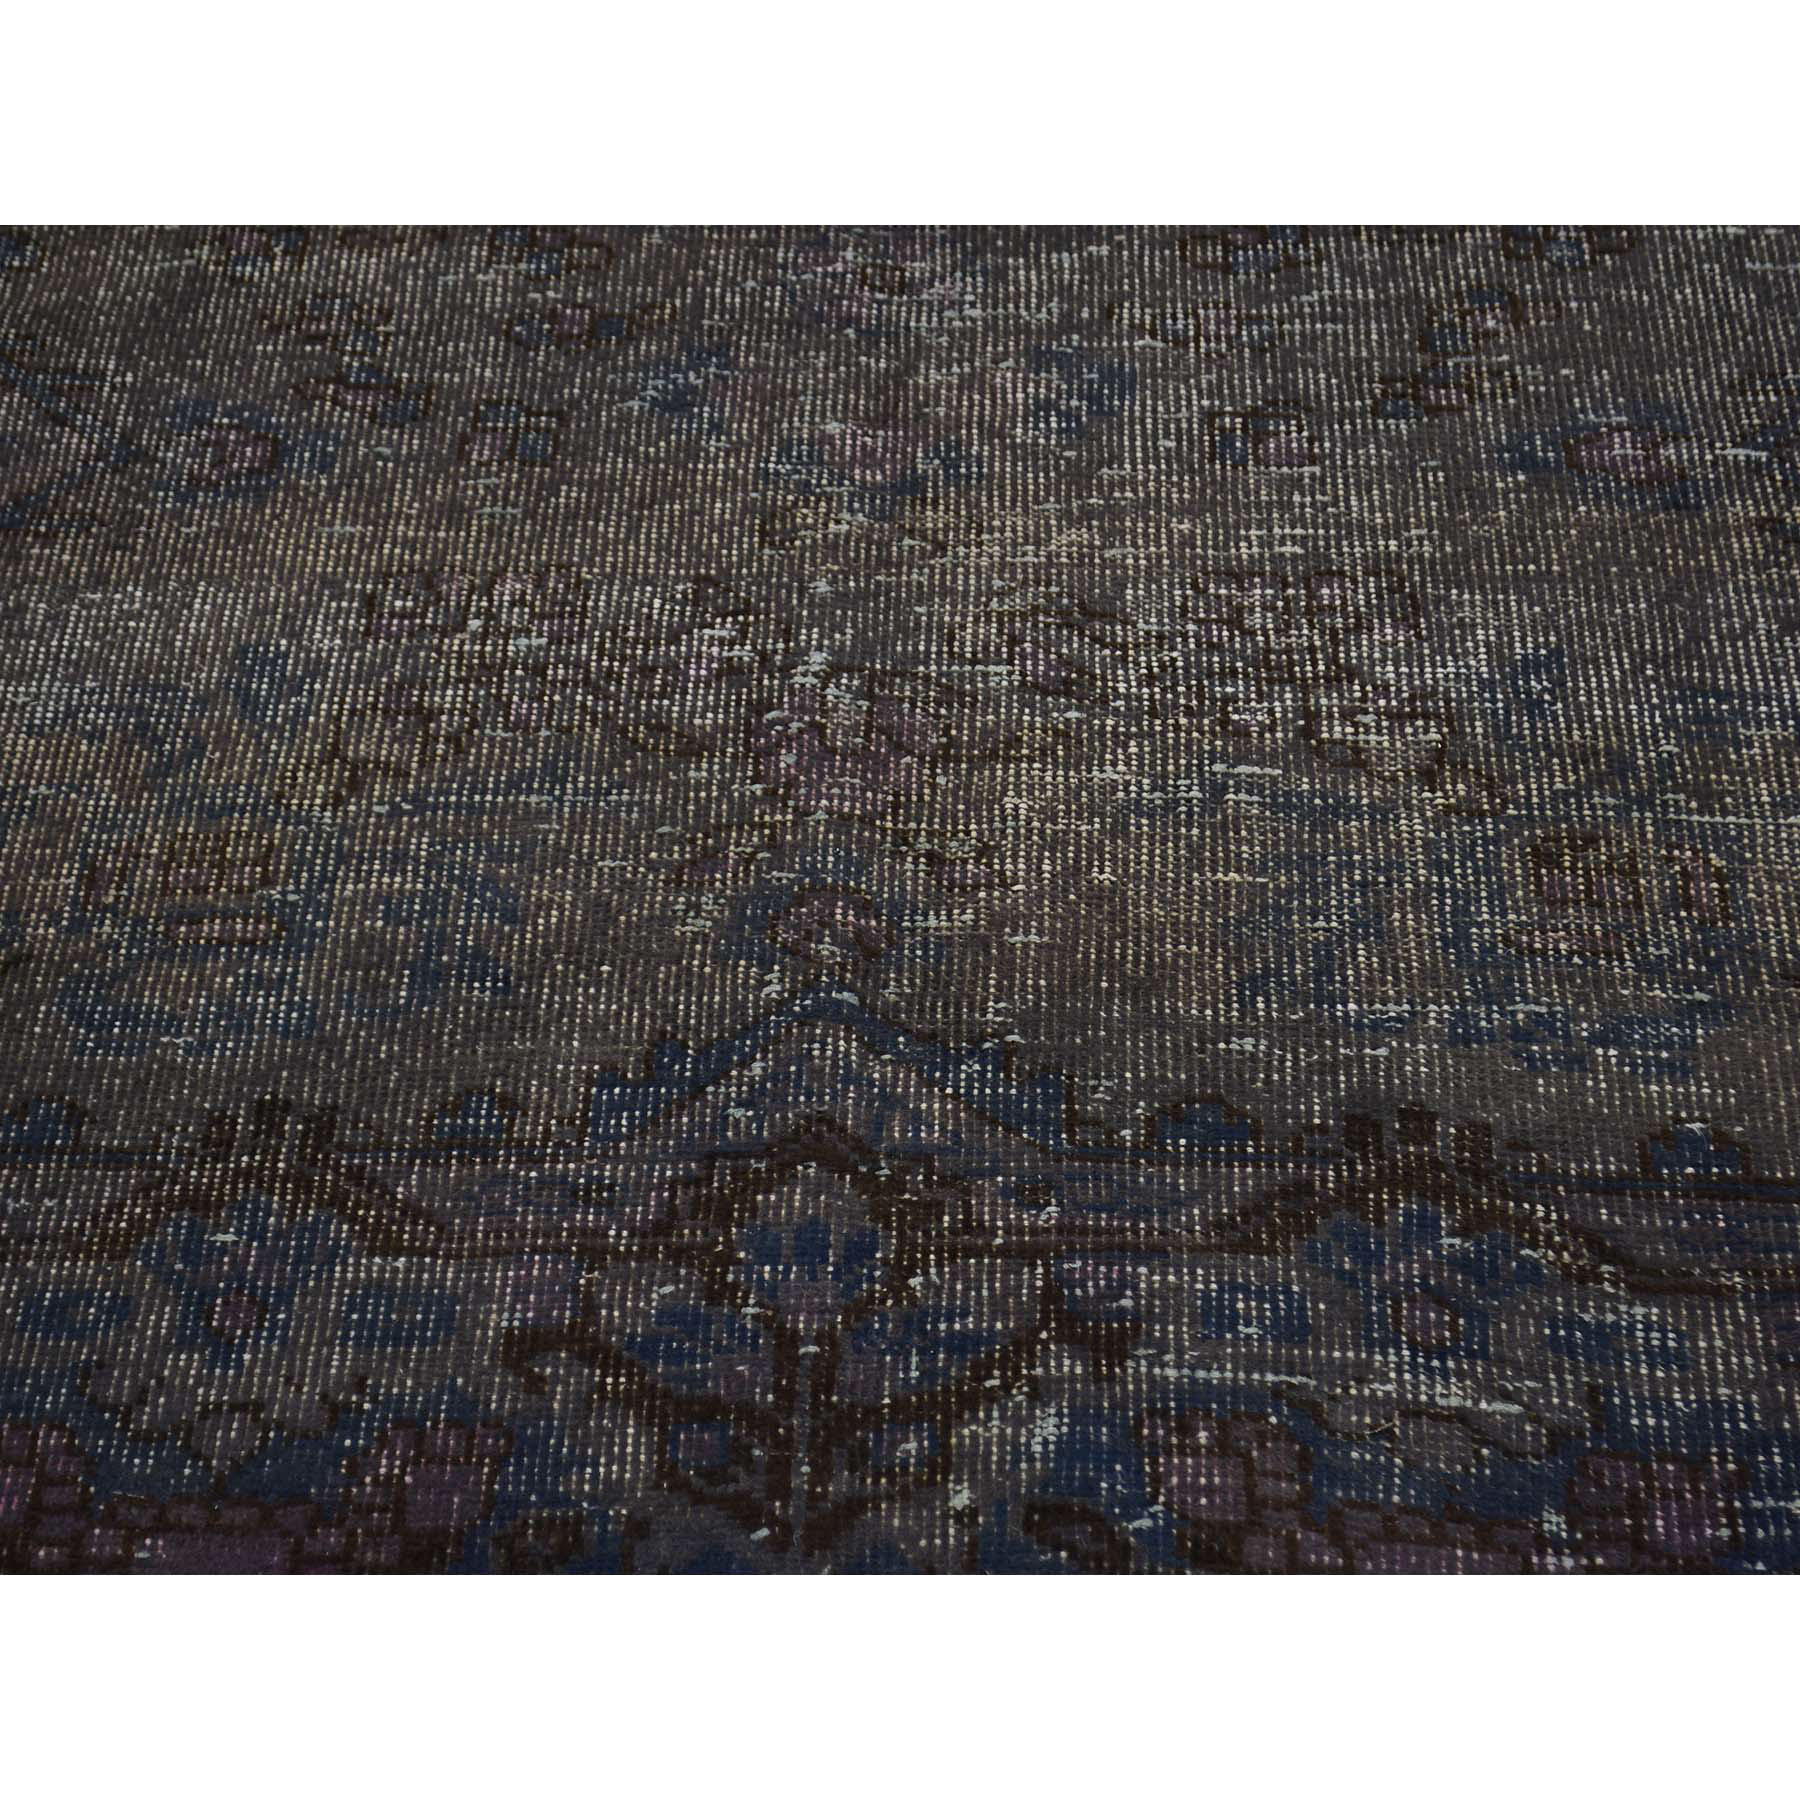 4-10--x9-10-- Persian Overdyed Hamadan Worn Hand-Knotted Wide Runner Rug 